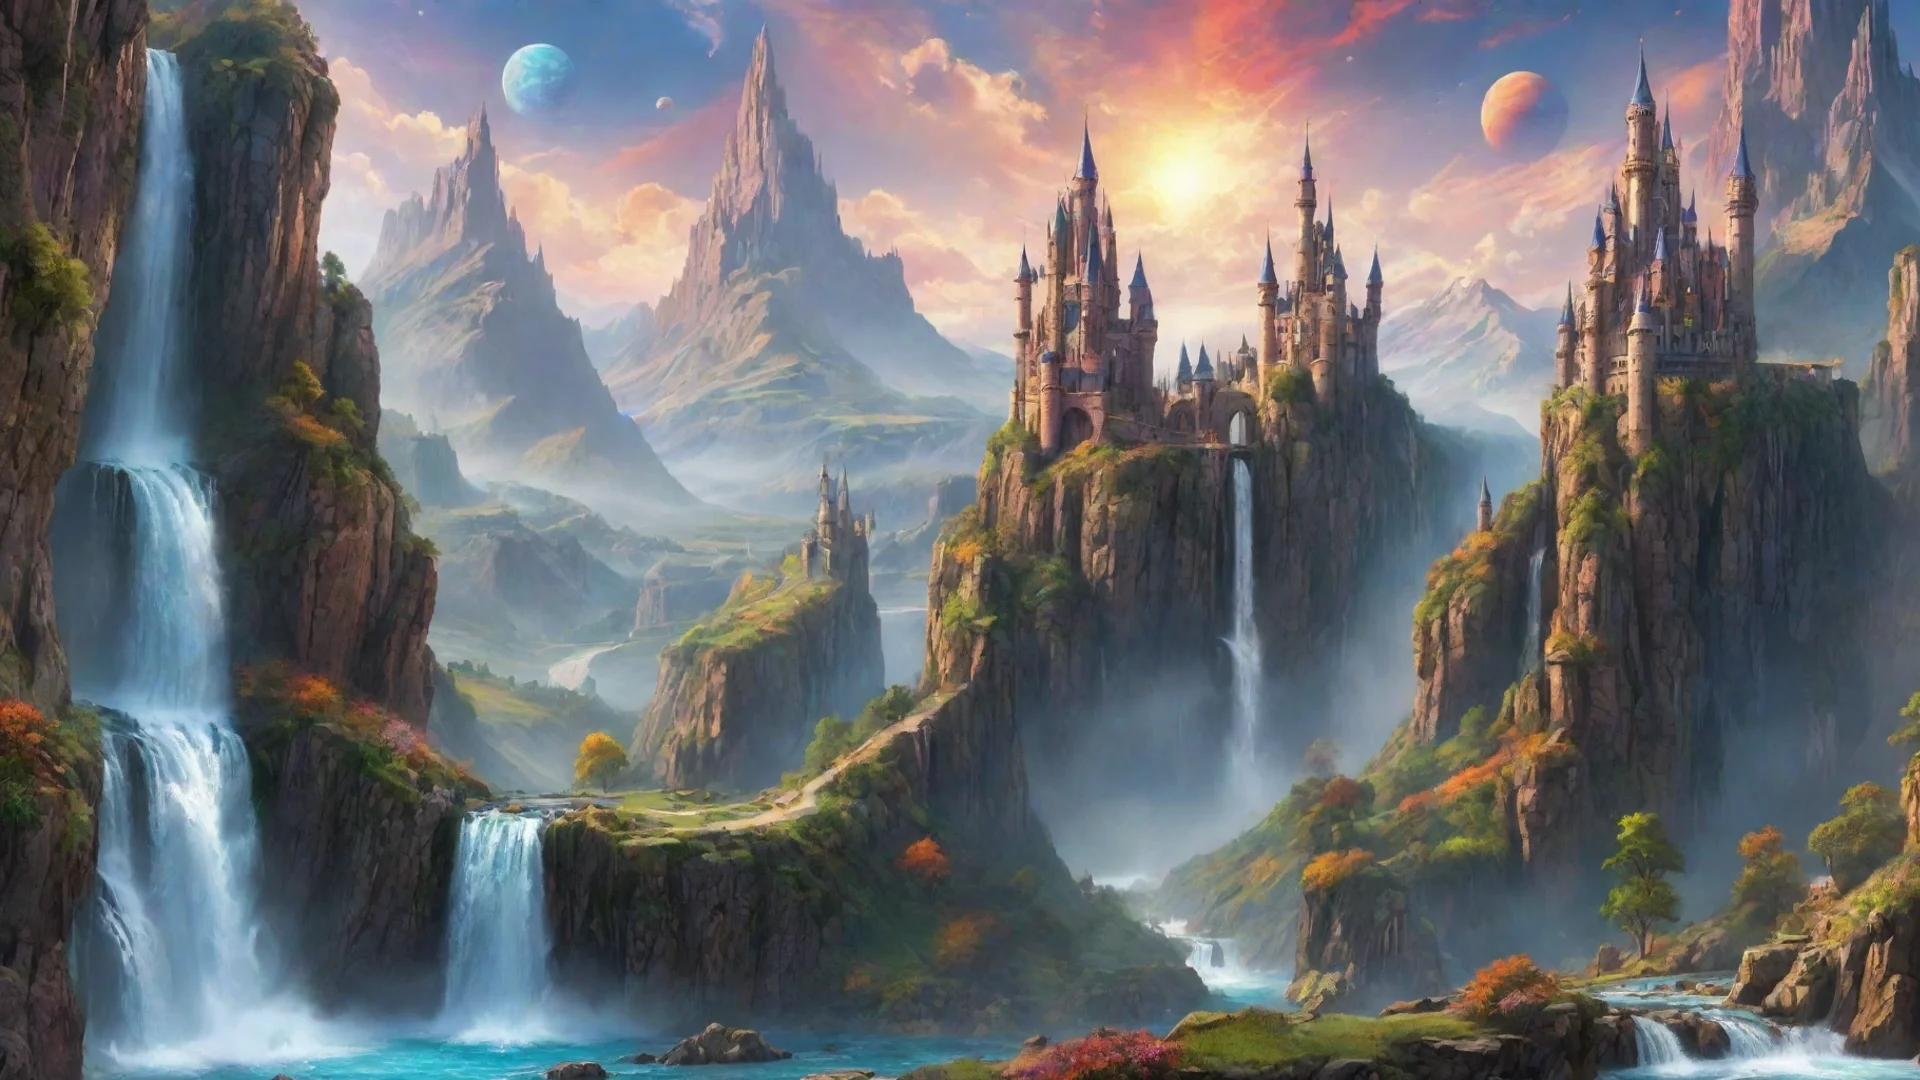 aiartstation art amazing scenery hd detailed colorful planets in sky realistic castles spiral towers high cliffs waterfalls beautiful wonderful aesthetic confident engaging wow 3 wide